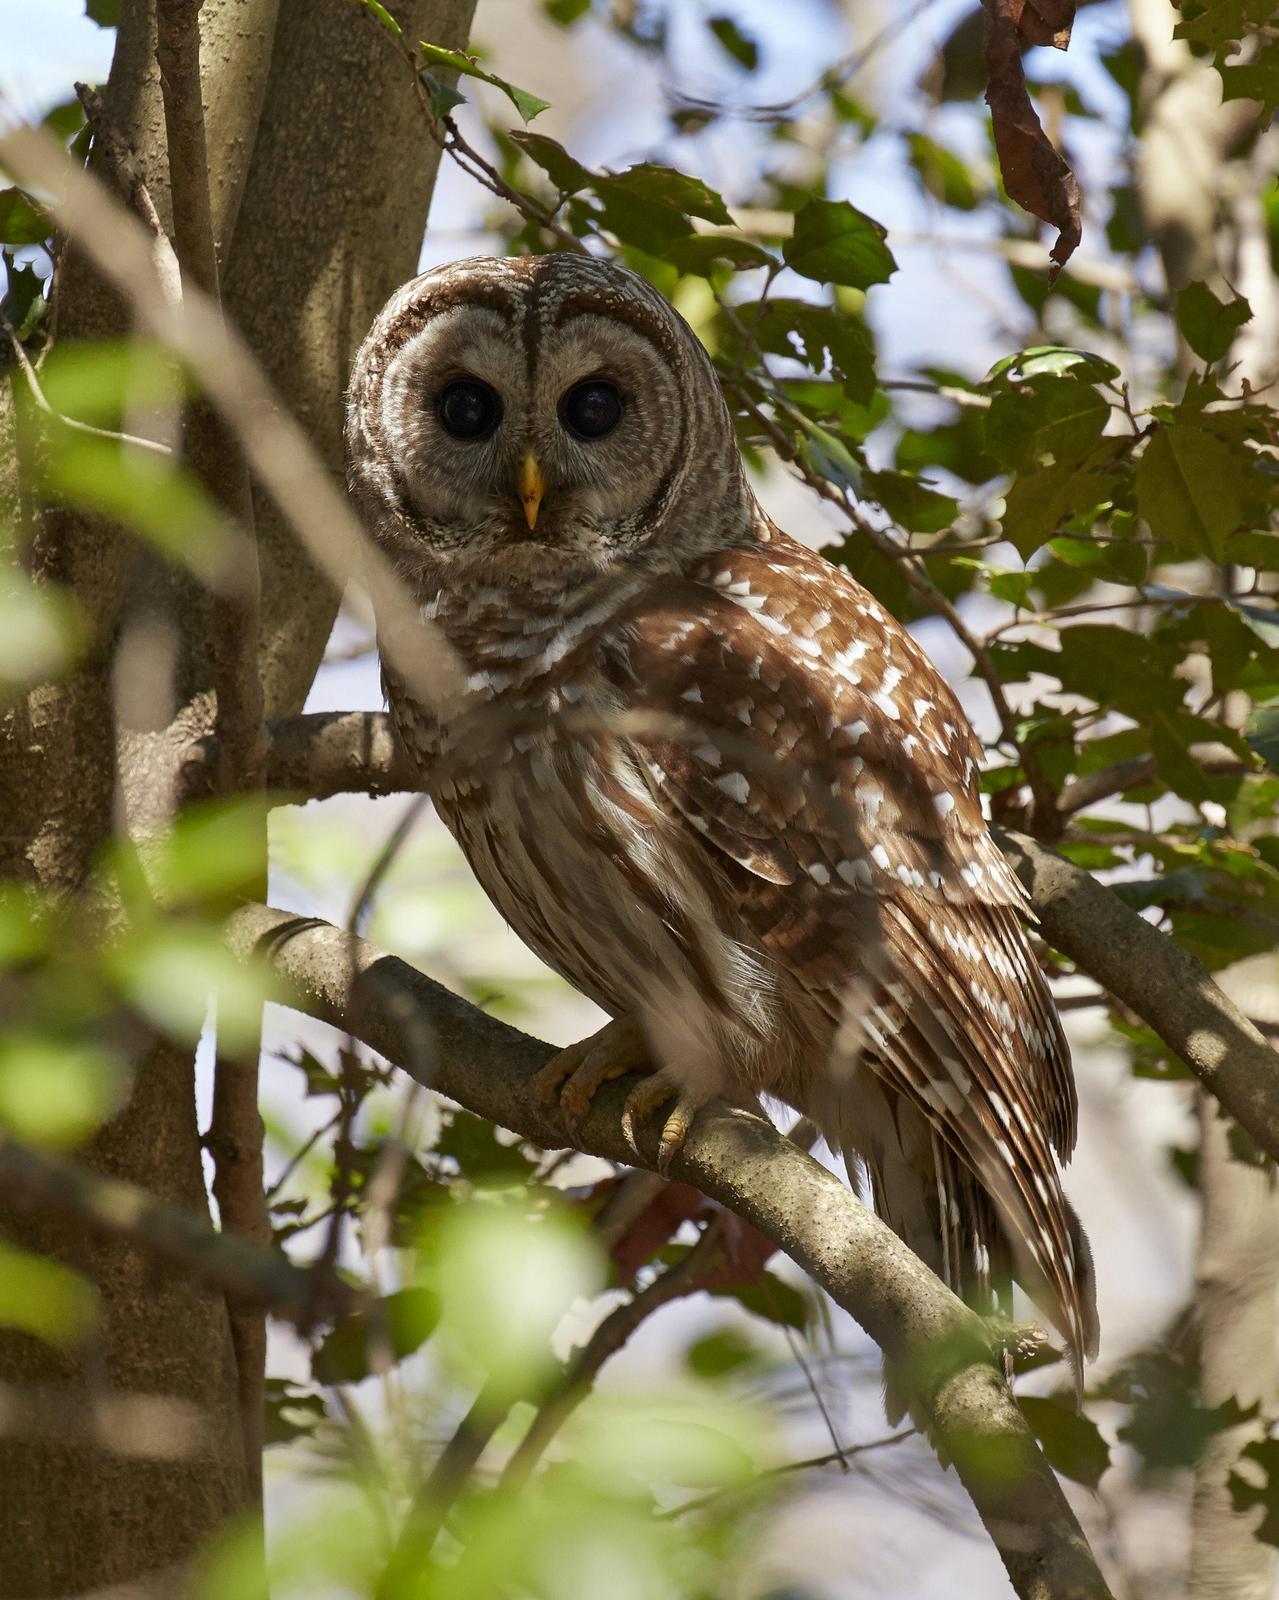 Barred Owl Photo by Eric Eisenstadt